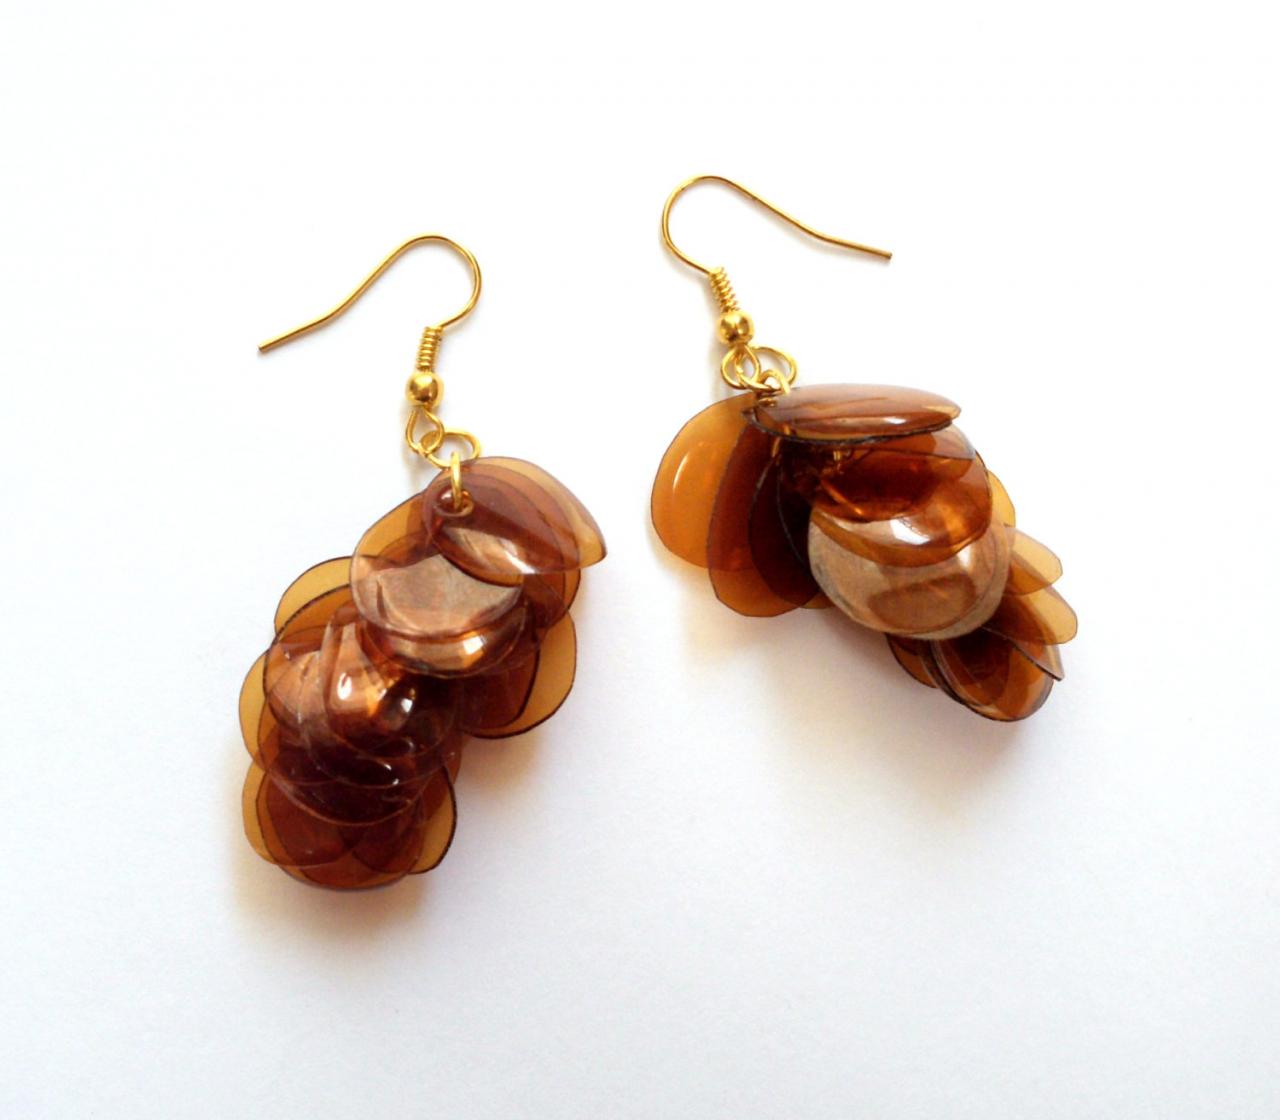 Upcycled Jewelry Brown Earrings Handmade Of Recycled Plastic Bottle, Amber Dangle Earrings On Golden Hooks, Eco Friendly Recycled Jewelry